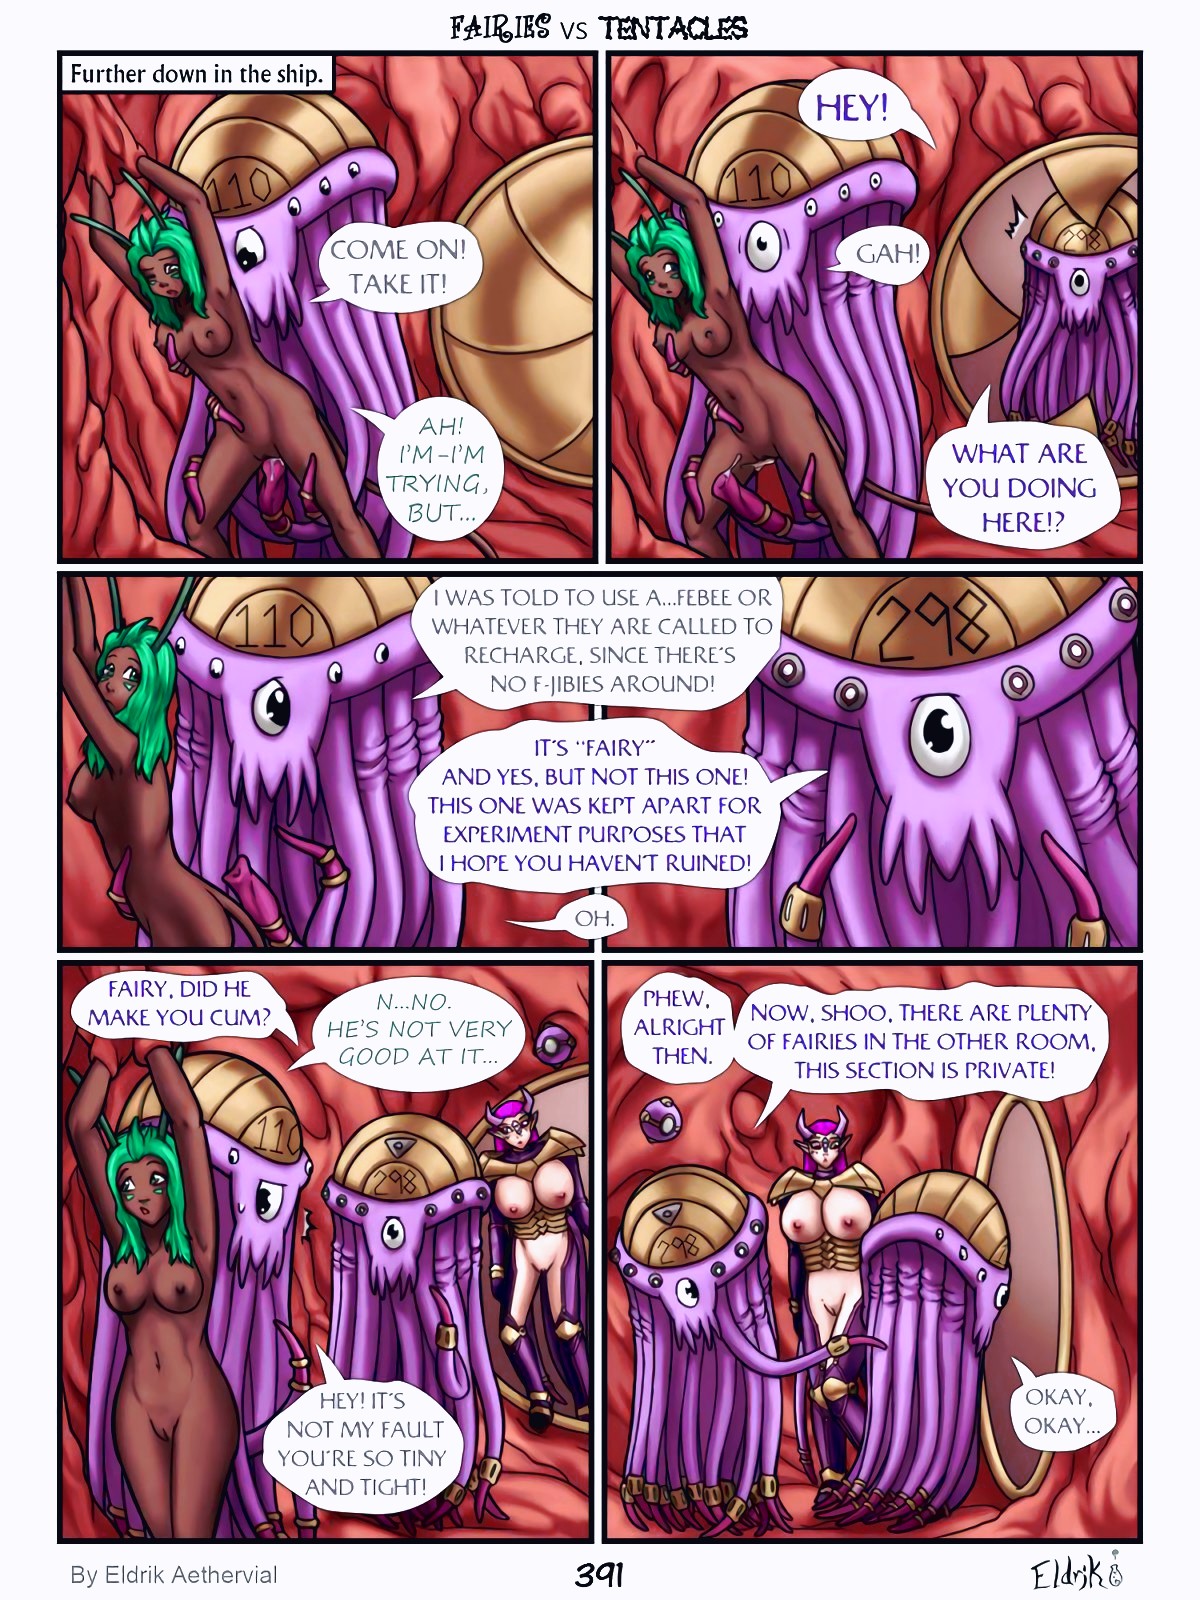 Fairies vs Tentacles page 392